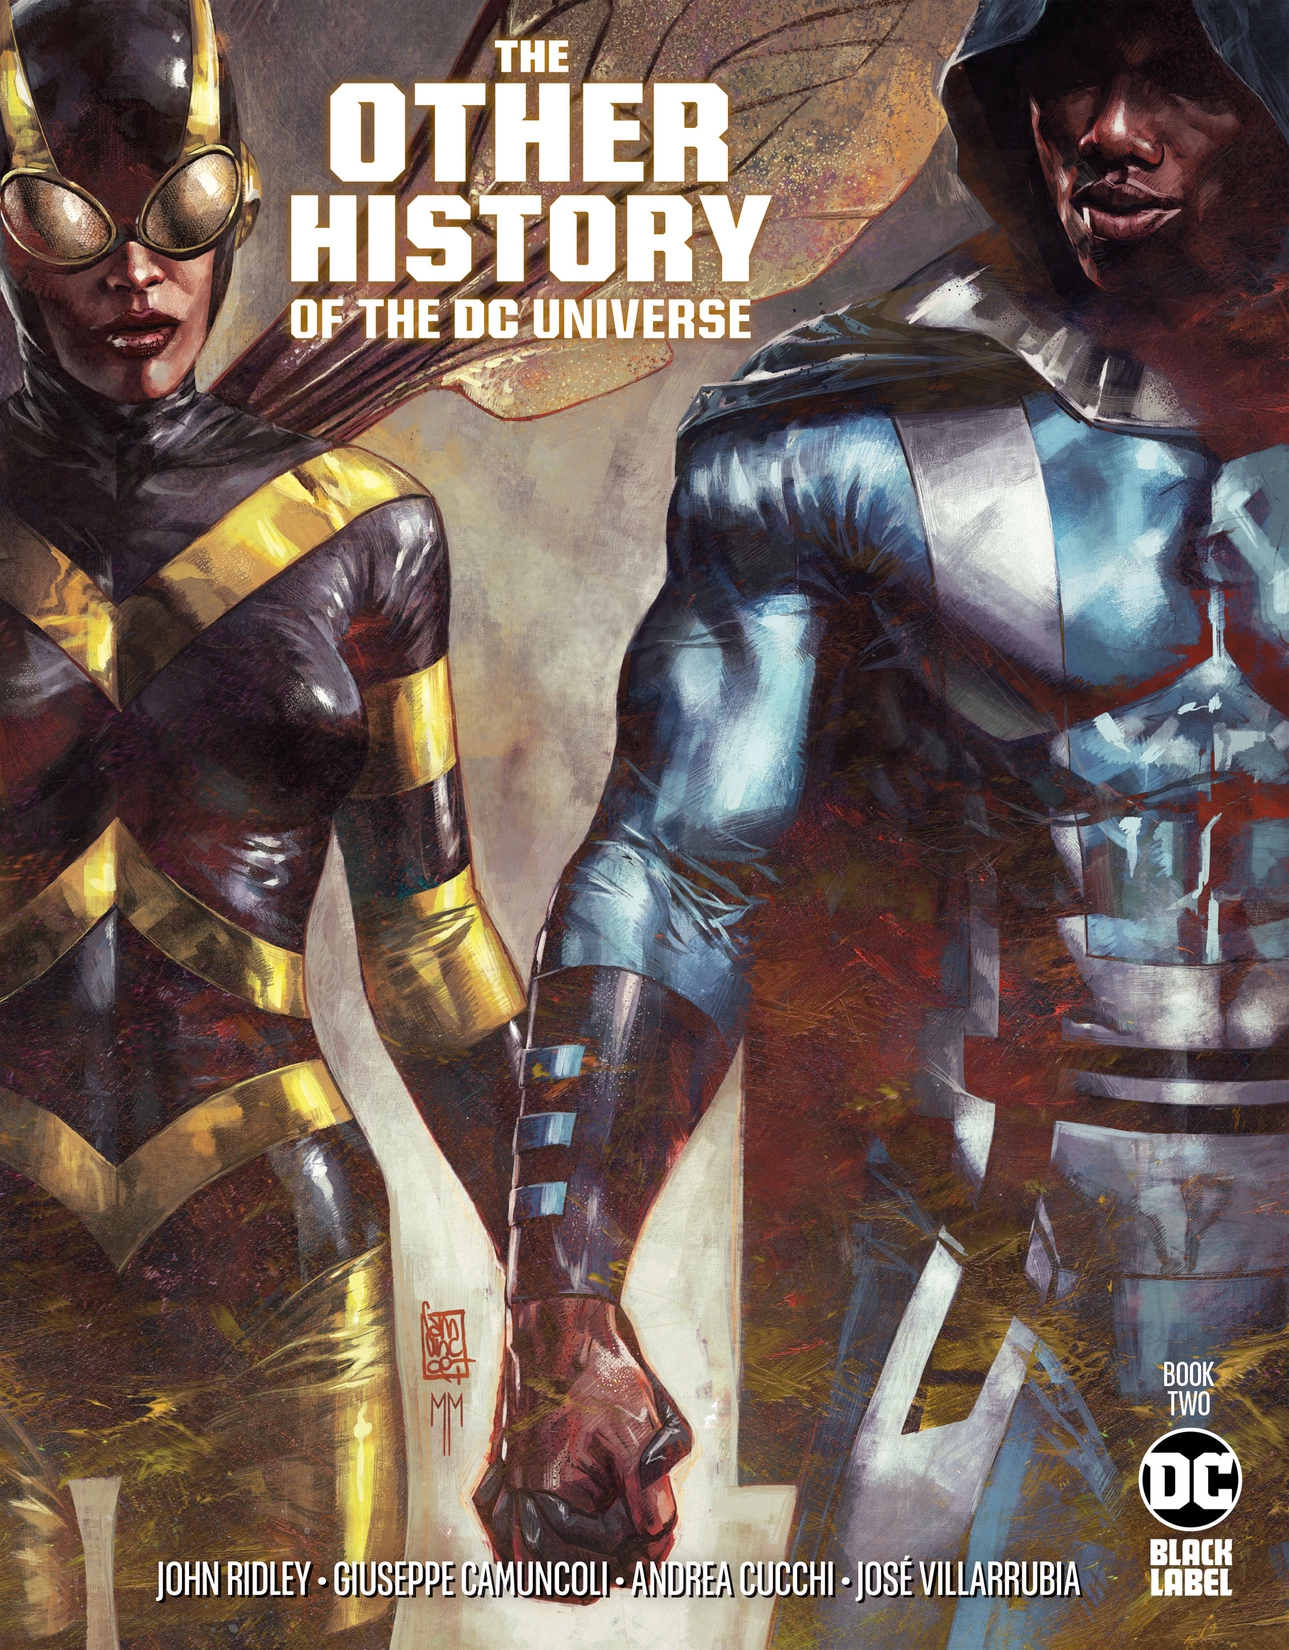 The Other History of the DC Universe #2 preview images